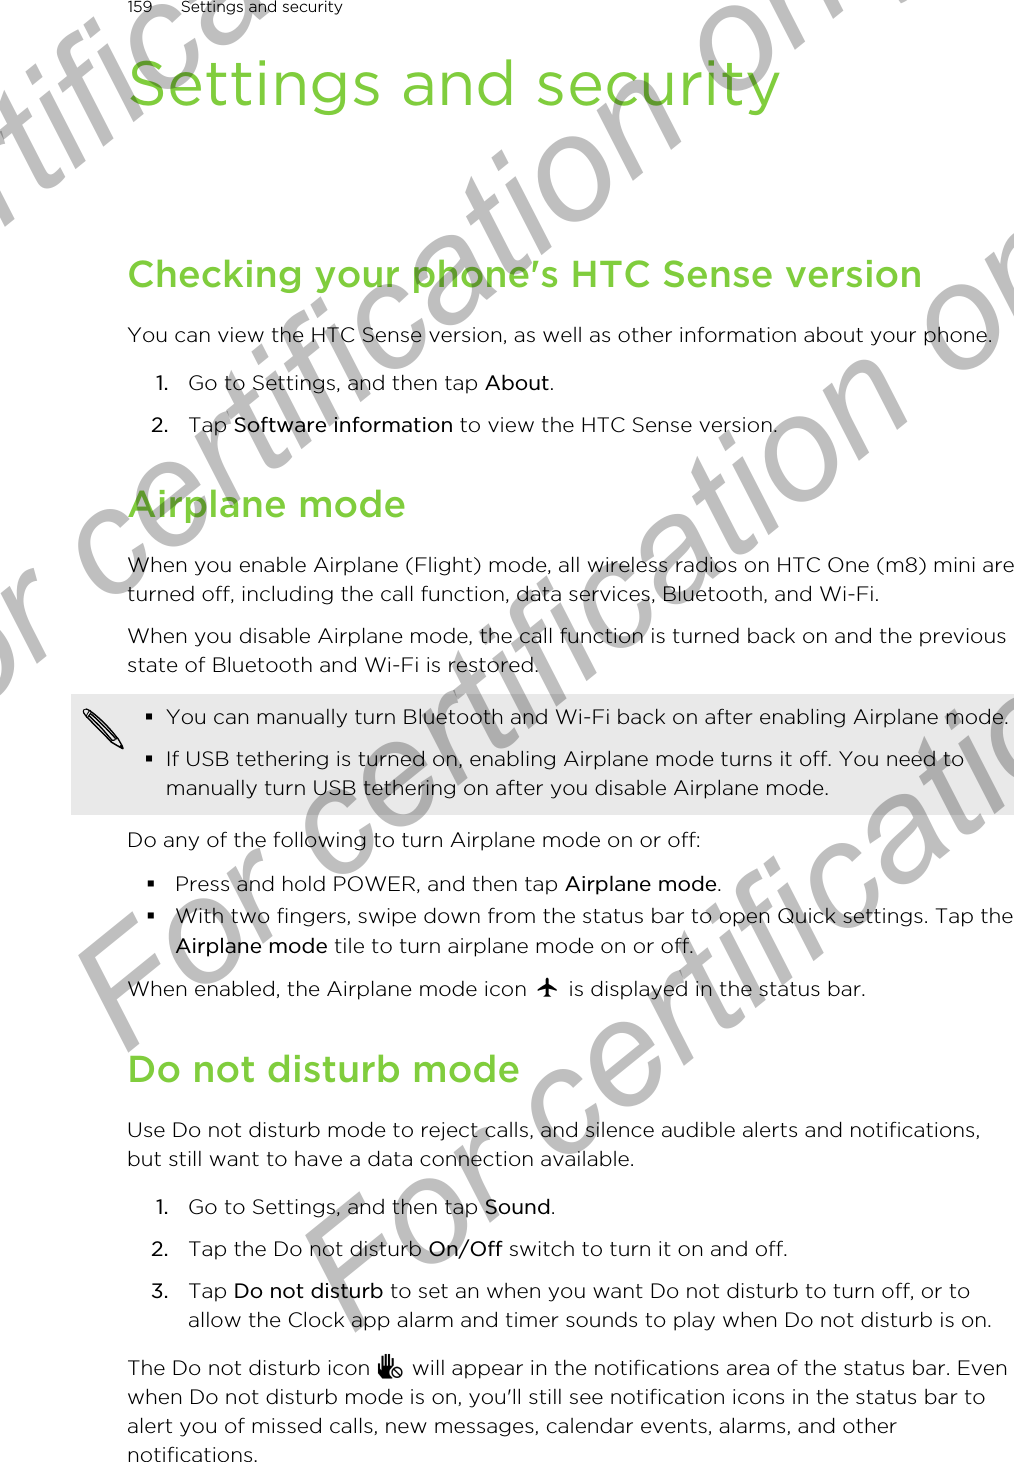 Settings and securityChecking your phone&apos;s HTC Sense versionYou can view the HTC Sense version, as well as other information about your phone.1. Go to Settings, and then tap About.2. Tap Software information to view the HTC Sense version.Airplane modeWhen you enable Airplane (Flight) mode, all wireless radios on HTC One (m8) mini areturned off, including the call function, data services, Bluetooth, and Wi-Fi.When you disable Airplane mode, the call function is turned back on and the previousstate of Bluetooth and Wi-Fi is restored.§You can manually turn Bluetooth and Wi-Fi back on after enabling Airplane mode.§If USB tethering is turned on, enabling Airplane mode turns it off. You need tomanually turn USB tethering on after you disable Airplane mode.Do any of the following to turn Airplane mode on or off:§Press and hold POWER, and then tap Airplane mode.§With two fingers, swipe down from the status bar to open Quick settings. Tap theAirplane mode tile to turn airplane mode on or off.When enabled, the Airplane mode icon   is displayed in the status bar.Do not disturb modeUse Do not disturb mode to reject calls, and silence audible alerts and notifications,but still want to have a data connection available.1. Go to Settings, and then tap Sound.2. Tap the Do not disturb On/Off switch to turn it on and off.3. Tap Do not disturb to set an when you want Do not disturb to turn off, or toallow the Clock app alarm and timer sounds to play when Do not disturb is on.The Do not disturb icon   will appear in the notifications area of the status bar. Evenwhen Do not disturb mode is on, you&apos;ll still see notification icons in the status bar toalert you of missed calls, new messages, calendar events, alarms, and othernotifications.159 Settings and securityFor certification only  For certification only  For certification only  For certification only 